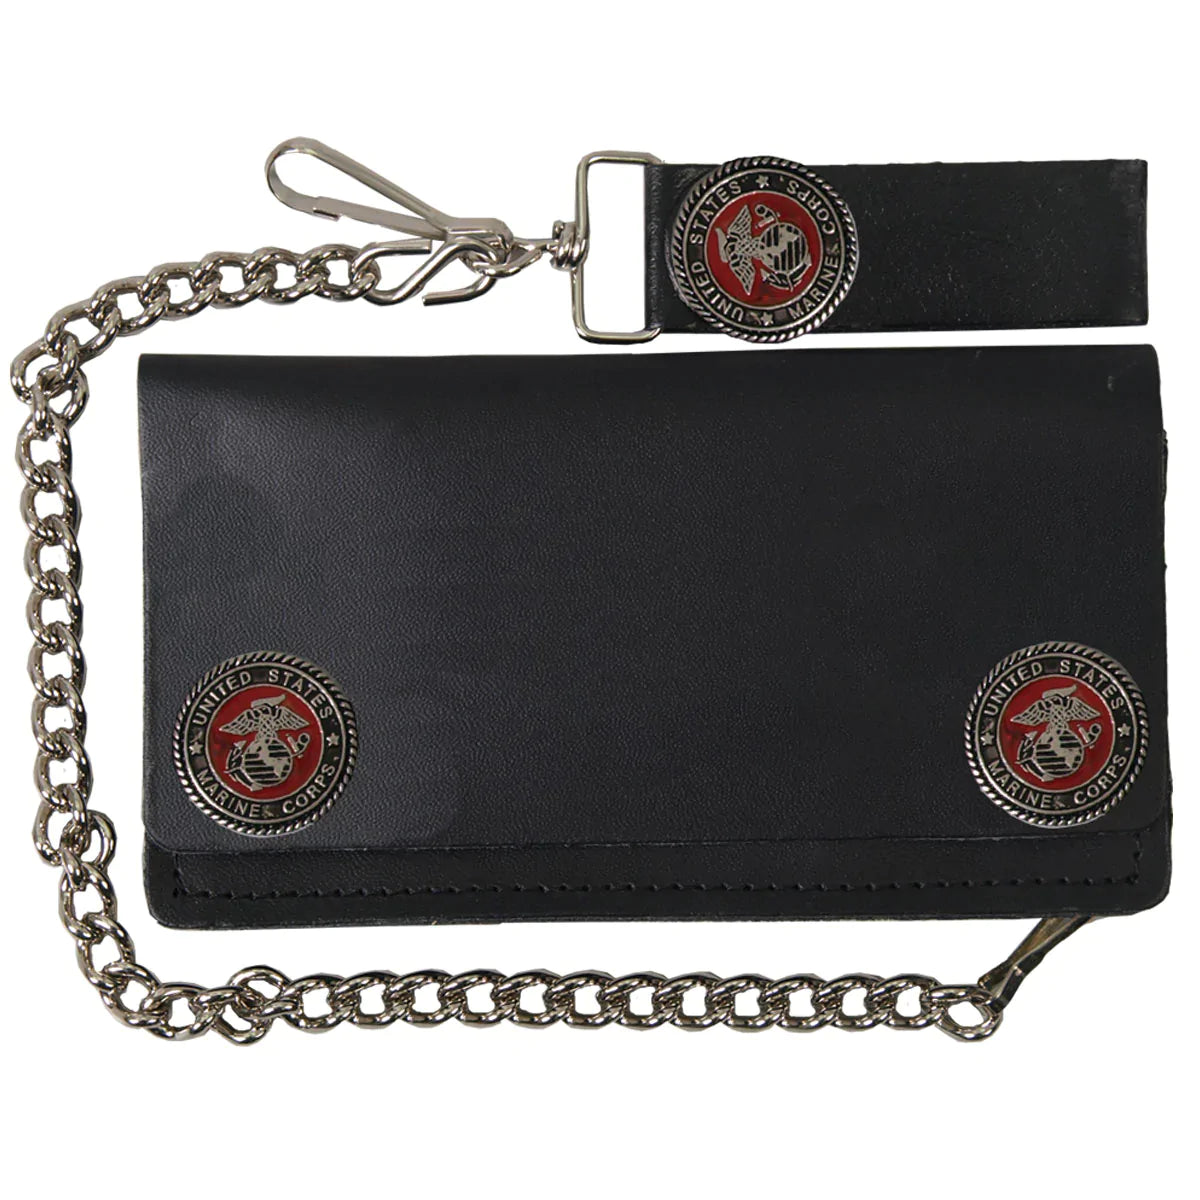 6" US Marines Bi-Fold WLA2012 Leather Snap Bi-Fold Wallet with Chain | Hot Leathers